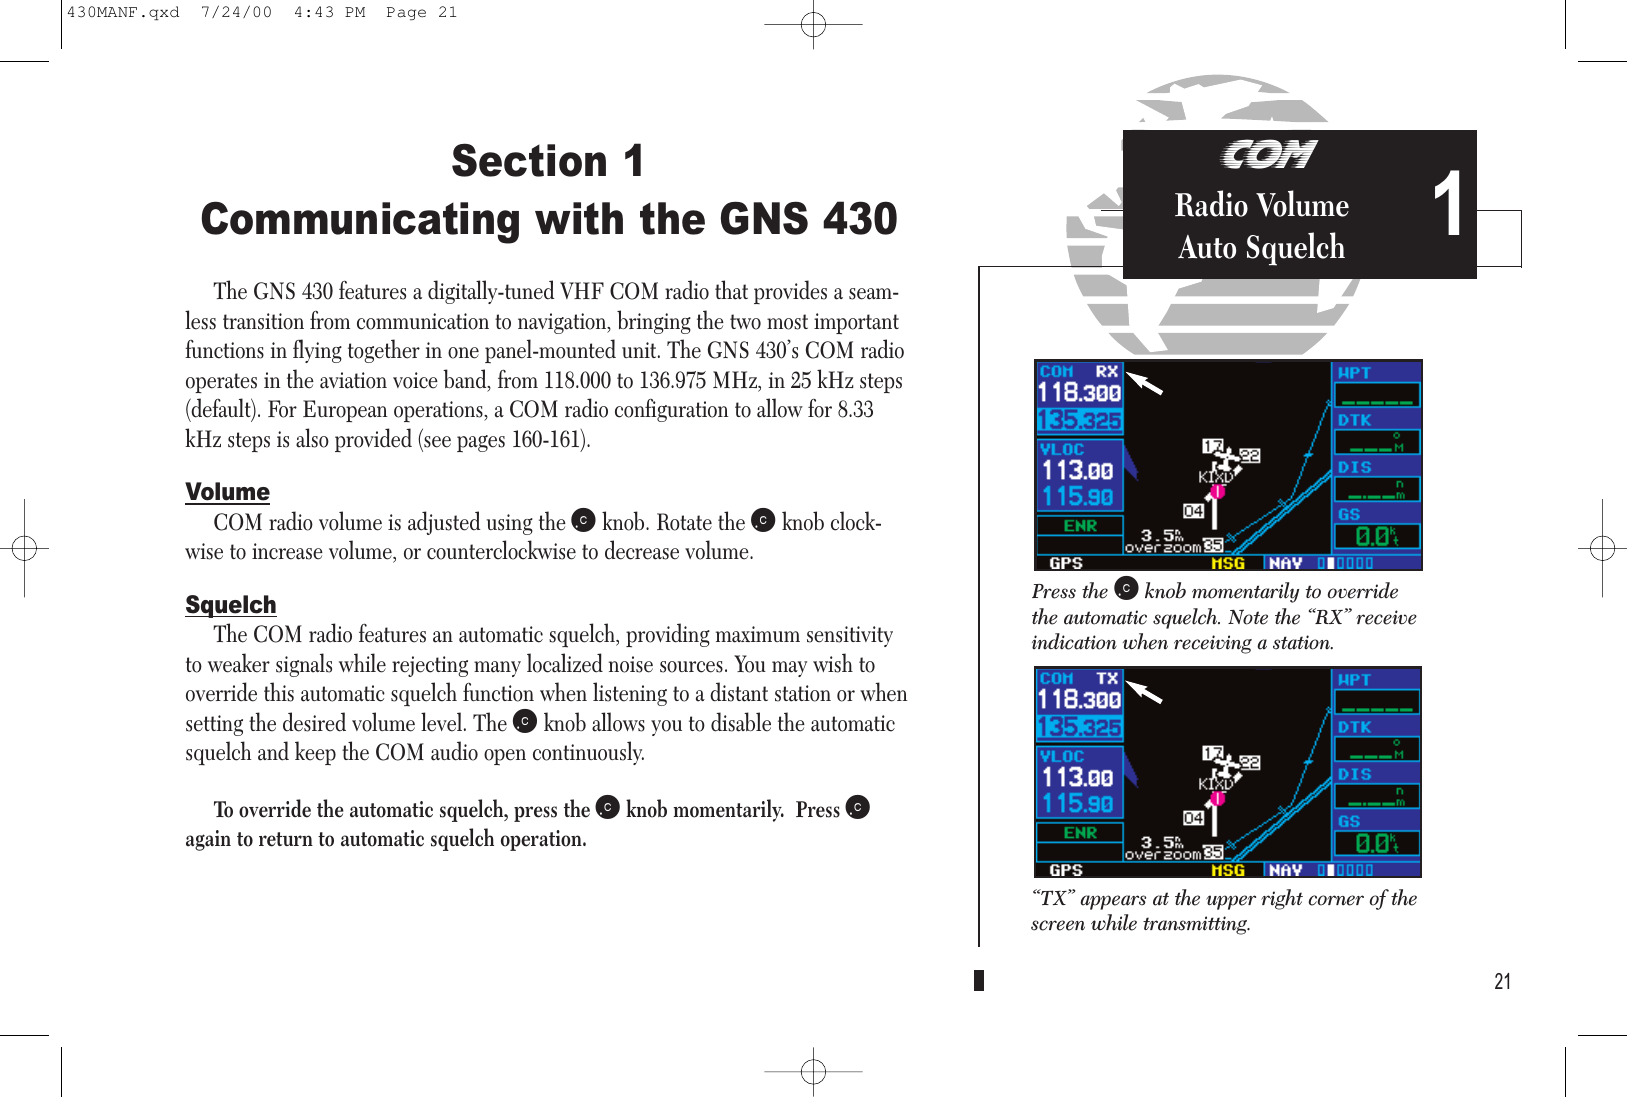 COMRadio VolumeAuto SquelchSection 1Communicating with the GNS 430The GNS 430 features a digitally-tuned VHF COM radio that provides a seam-less transition from communication to navigation, bringing the two most importantfunctions in flying together in one panel-mounted unit. The GNS 430’s COM radiooperates in the aviation voice band, from 118.000 to 136.975 MHz, in 25 kHz steps(default). For European operations, a COM radio configuration to allow for 8.33kHz steps is also provided (see pages 160-161).VolumeCOM radio volume is adjusted using the kknob. Rotate the kknob clock-wise to increase volume, or counterclockwise to decrease volume.SquelchThe COM radio features an automatic squelch, providing maximum sensitivityto weaker signals while rejecting many localized noise sources. You may wish tooverride this automatic squelch function when listening to a distant station or whensetting the desired volume level. The kknob allows you to disable the automaticsquelch and keep the COM audio open continuously.To override the automatic squelch, press the kknob momentarily.  Press kagain to return to automatic squelch operation.21Press the kknob momentarily to overridethe automatic squelch. Note the “RX” receiveindication when receiving a station.“TX” appears at the upper right corner of thescreen while transmitting.1430MANF.qxd  7/24/00  4:43 PM  Page 21